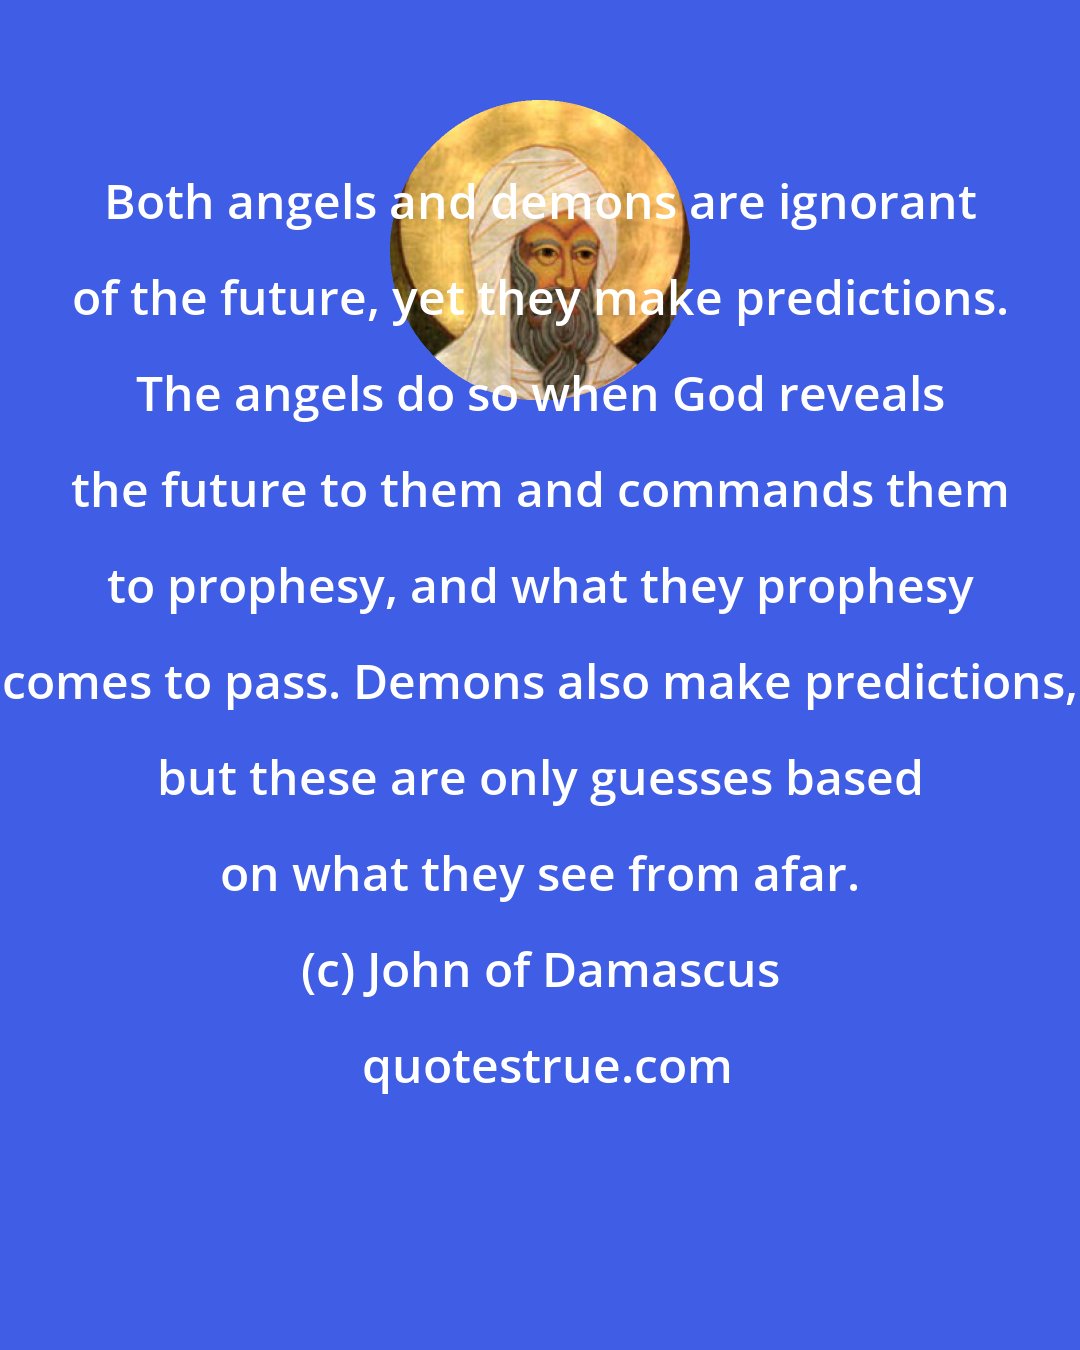 John of Damascus: Both angels and demons are ignorant of the future, yet they make predictions. The angels do so when God reveals the future to them and commands them to prophesy, and what they prophesy comes to pass. Demons also make predictions, but these are only guesses based on what they see from afar.